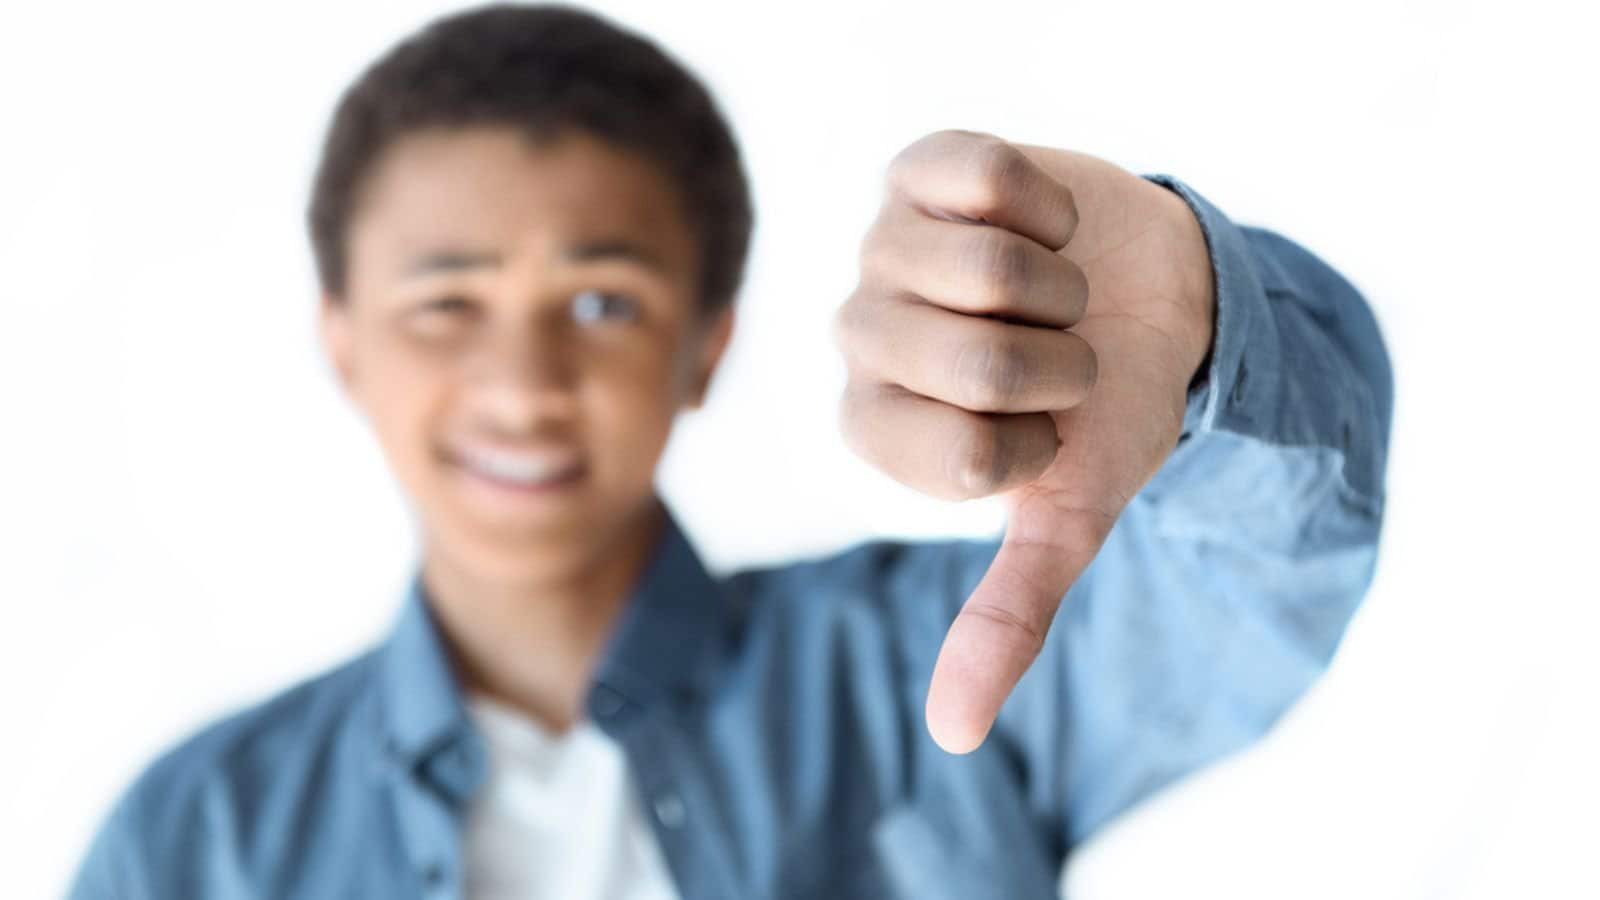 African american teenager showing thumb down